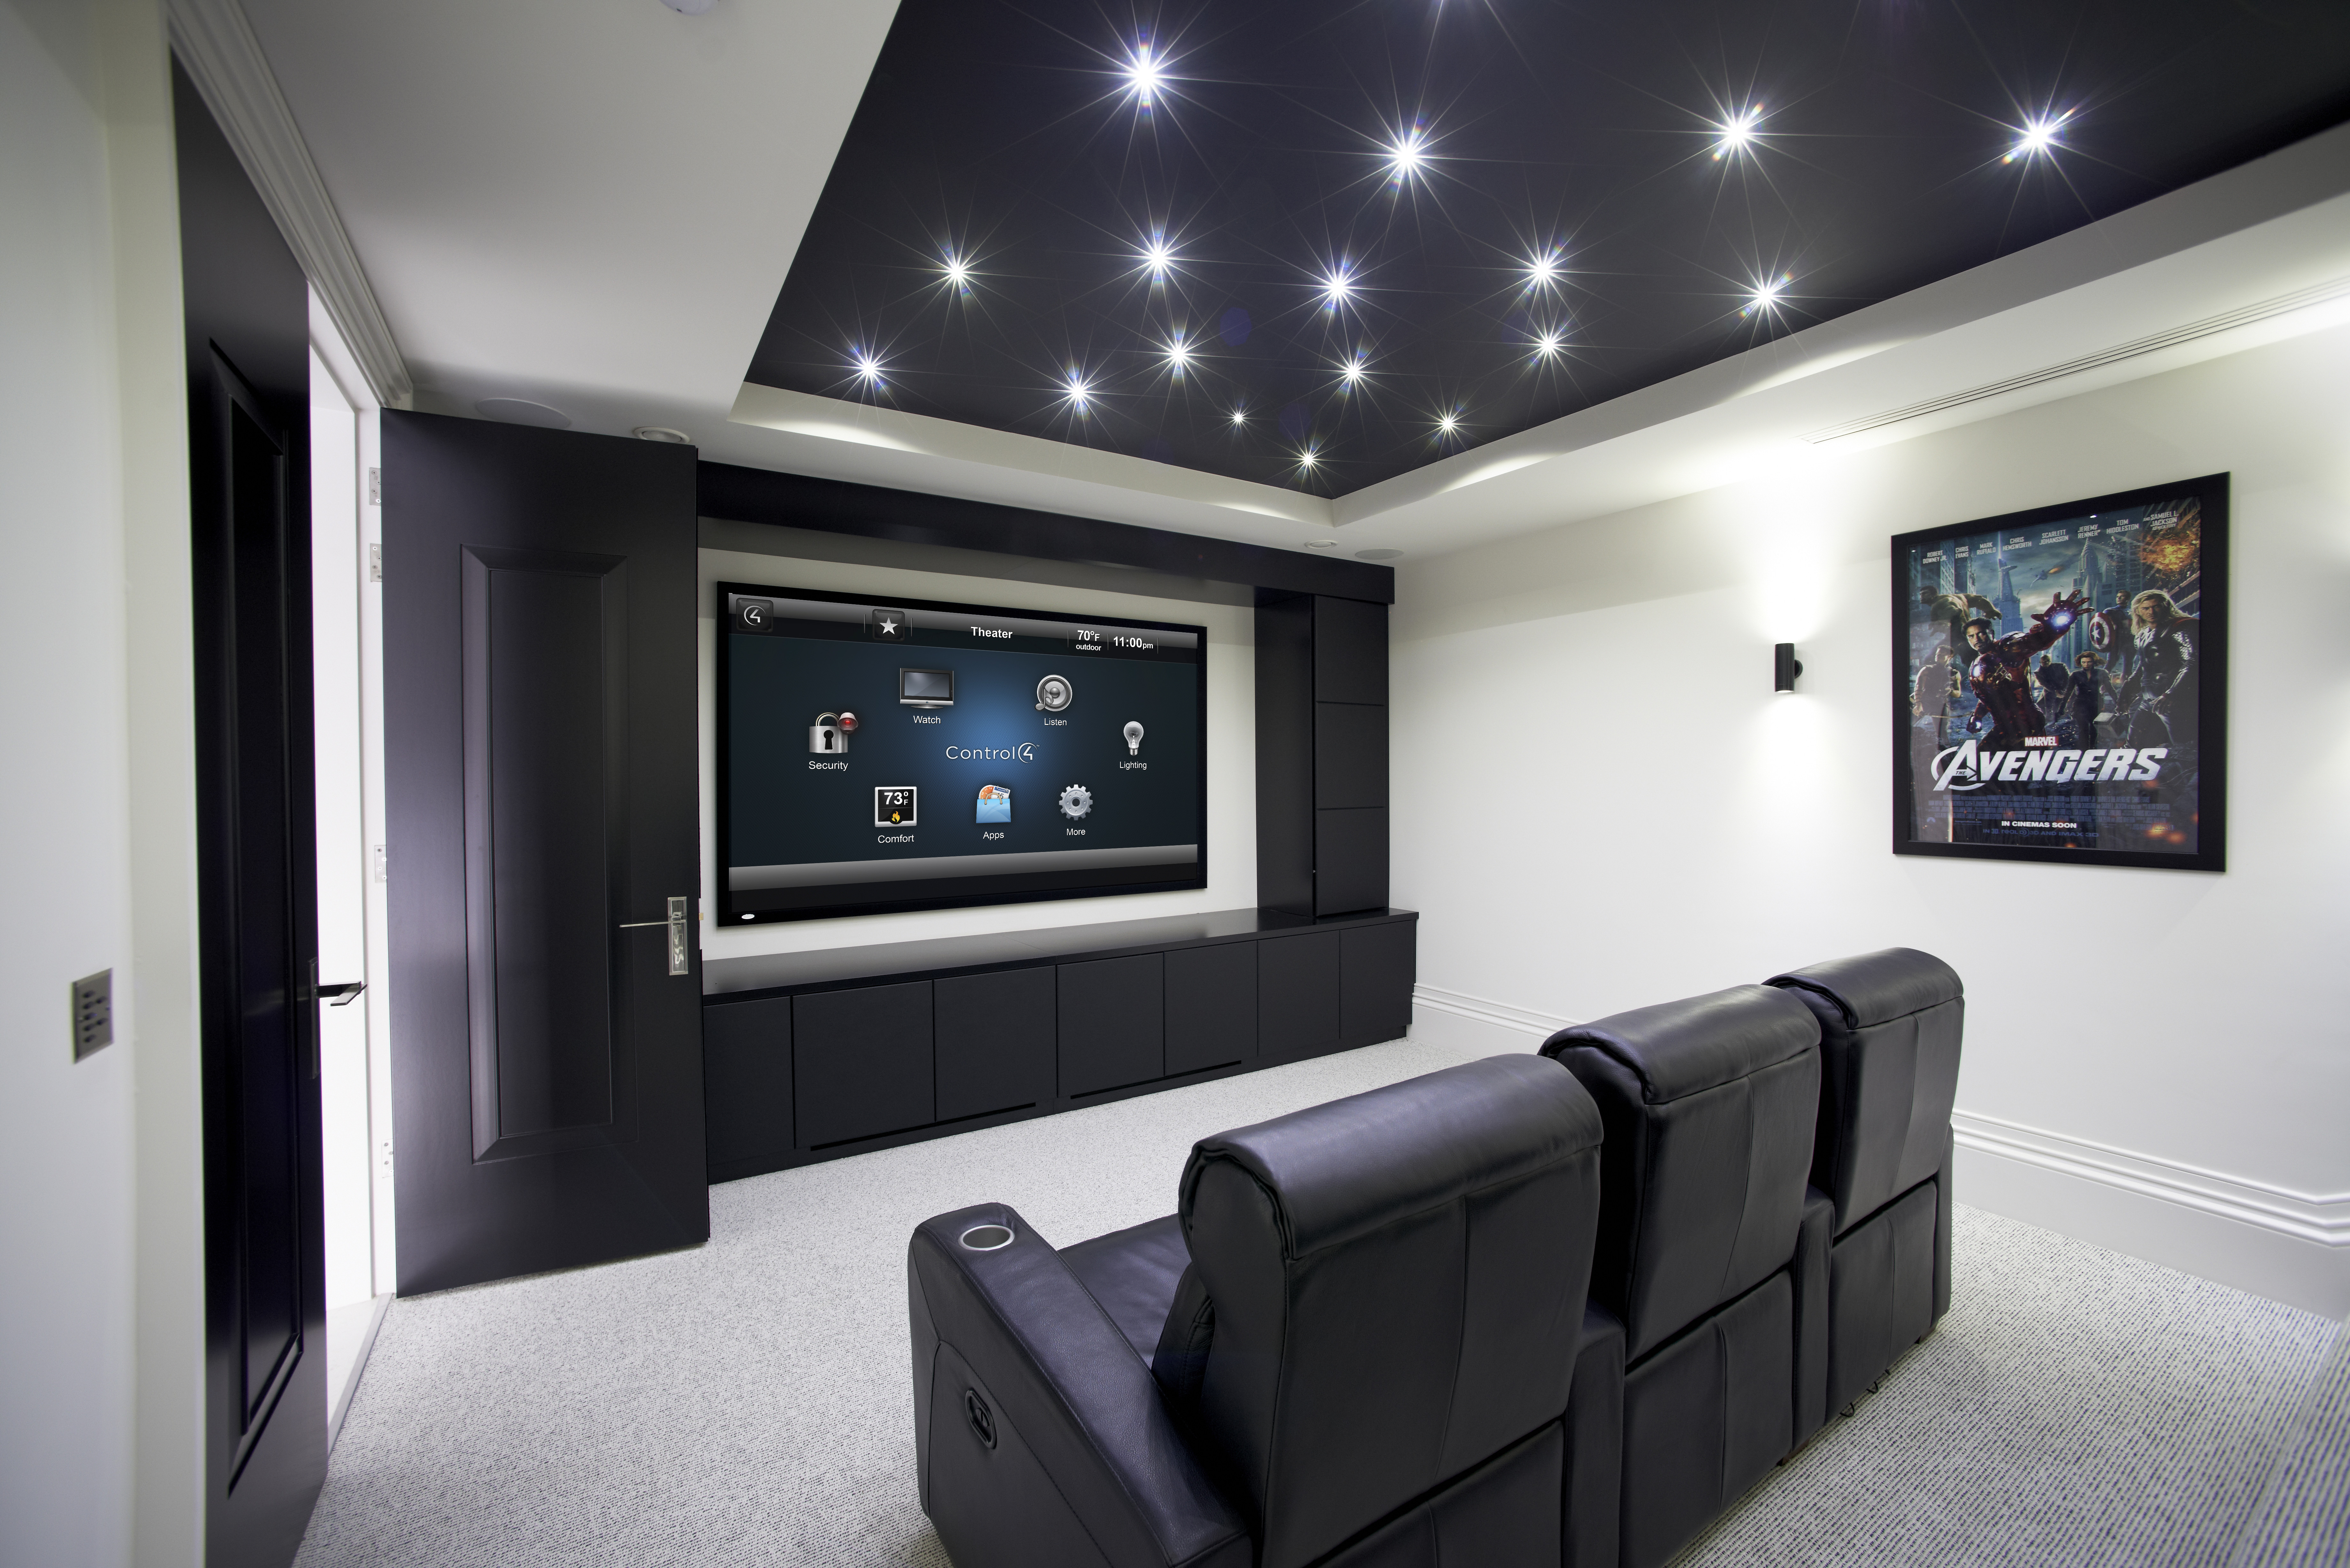 Small Home Theater with Control4 in Houston Texas